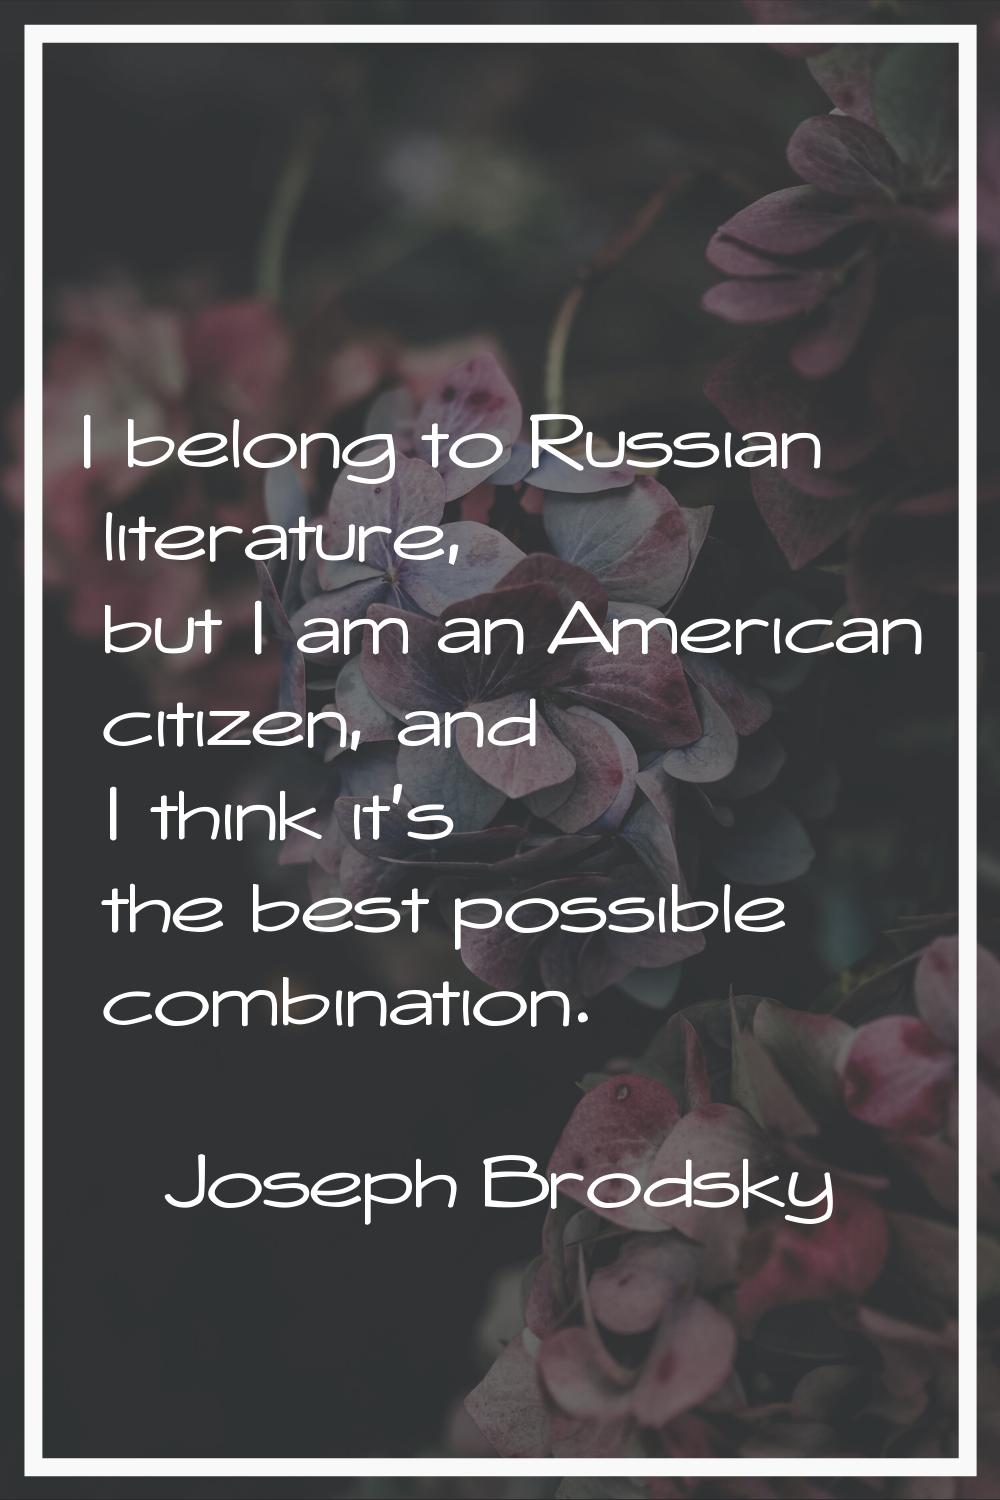 I belong to Russian literature, but I am an American citizen, and I think it's the best possible co